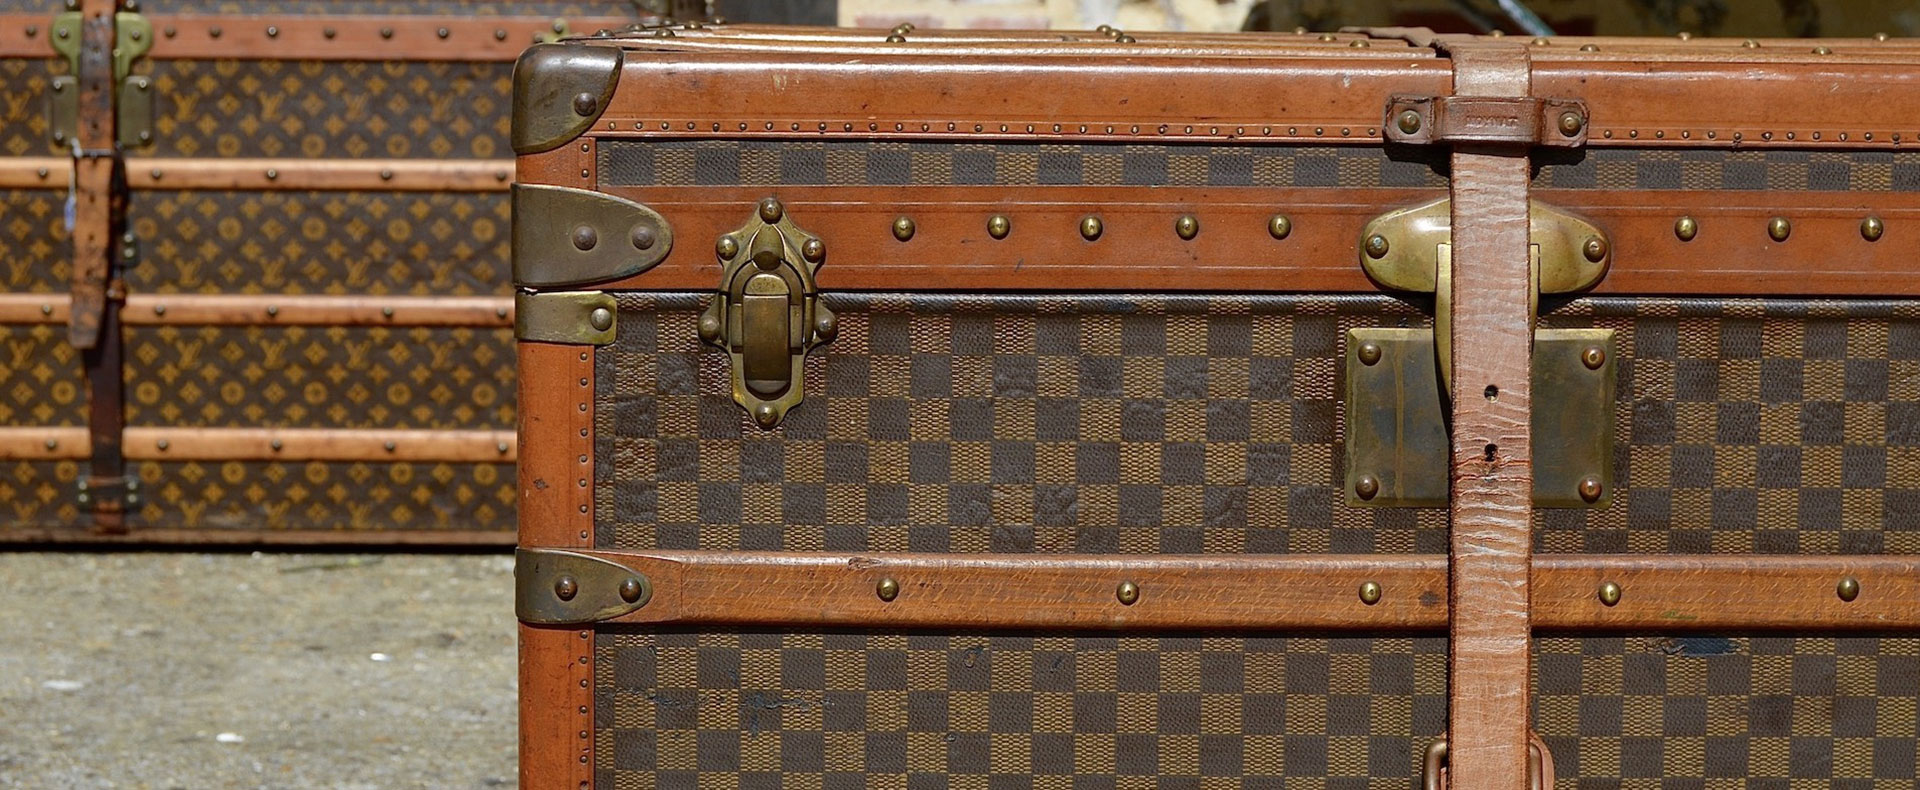 Interior decoration, Louis Vuitton collection trunk - Malle2luxe